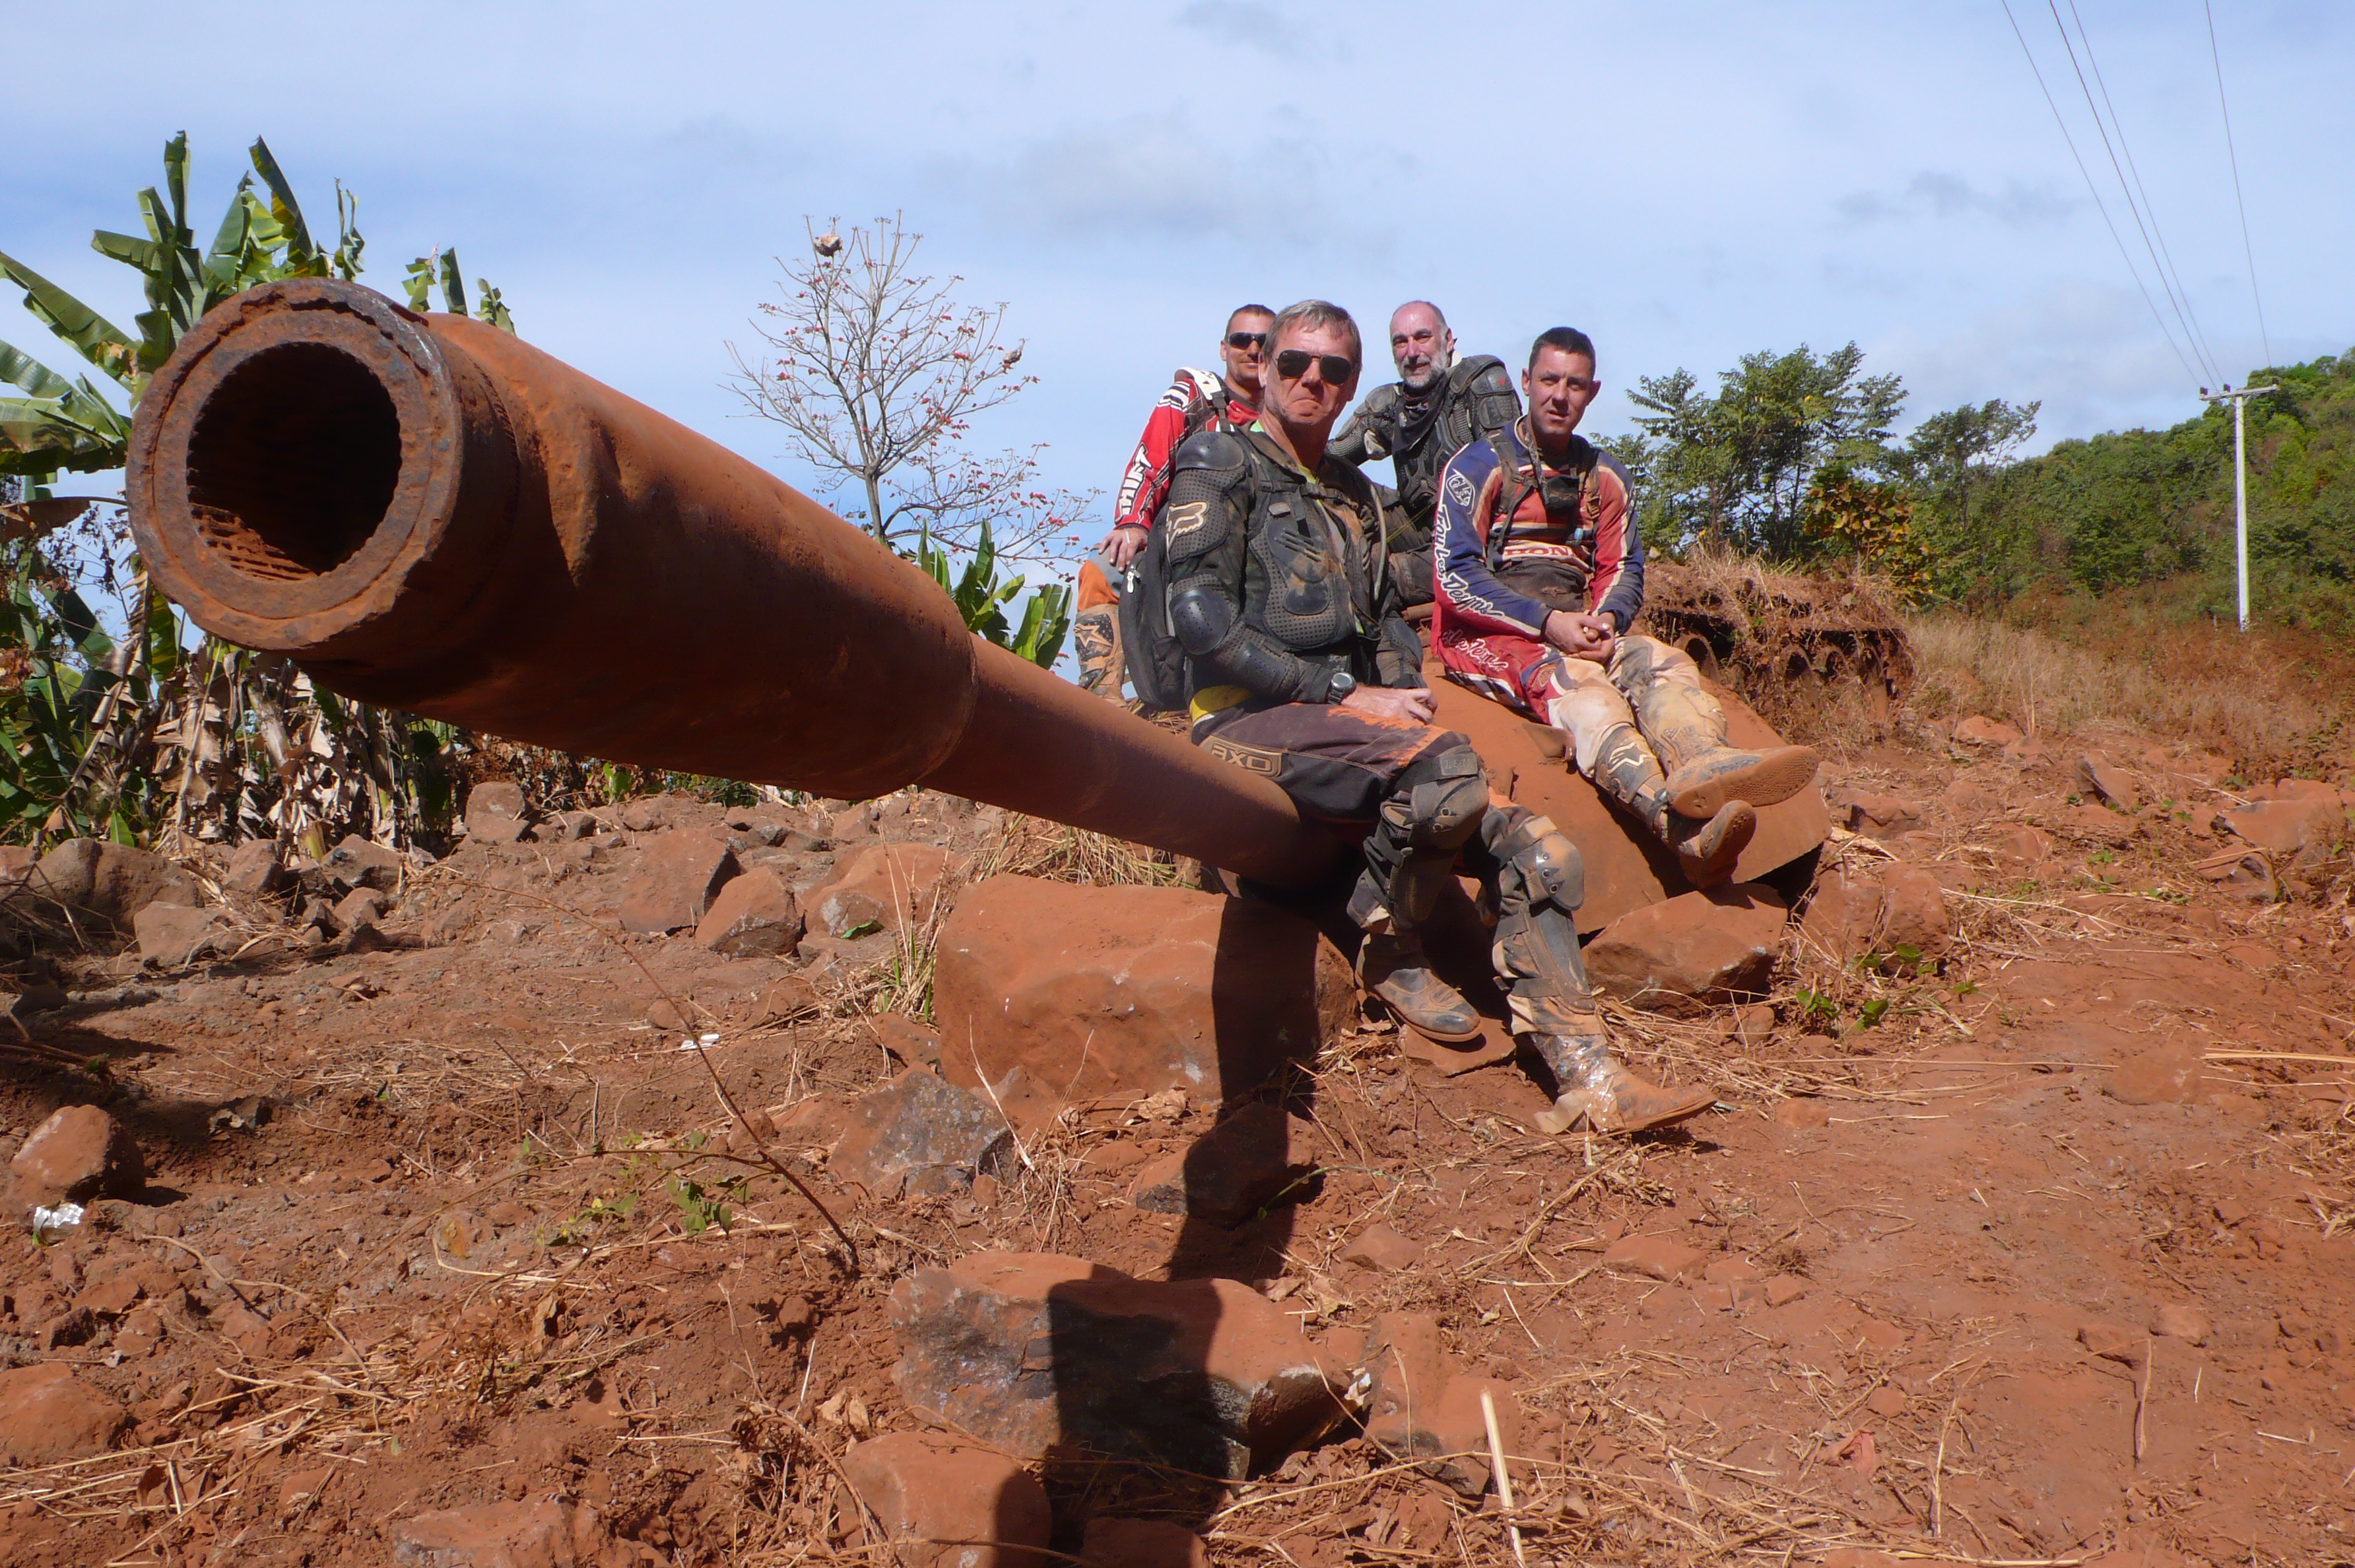 Explore Indochina motorcycle tour members sitting on a destroyed tank